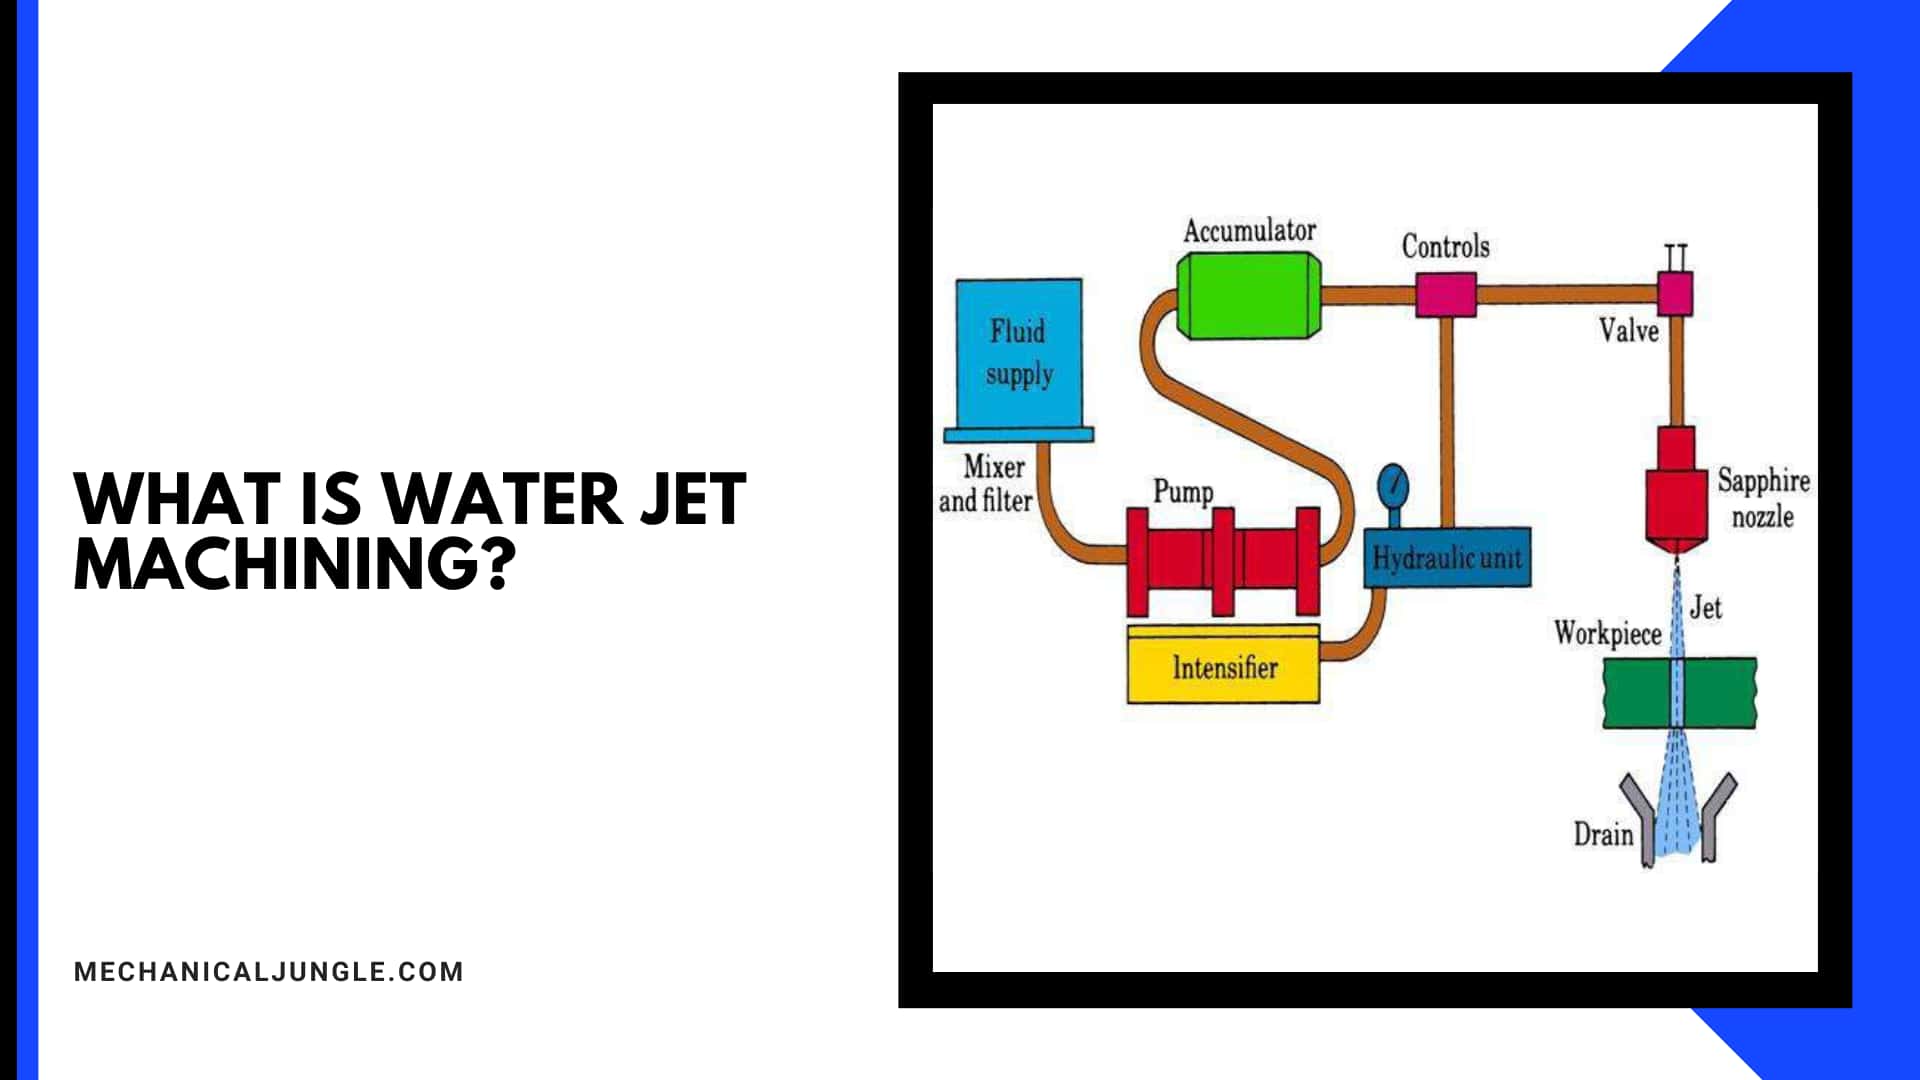 What Is Water Jet Machining?